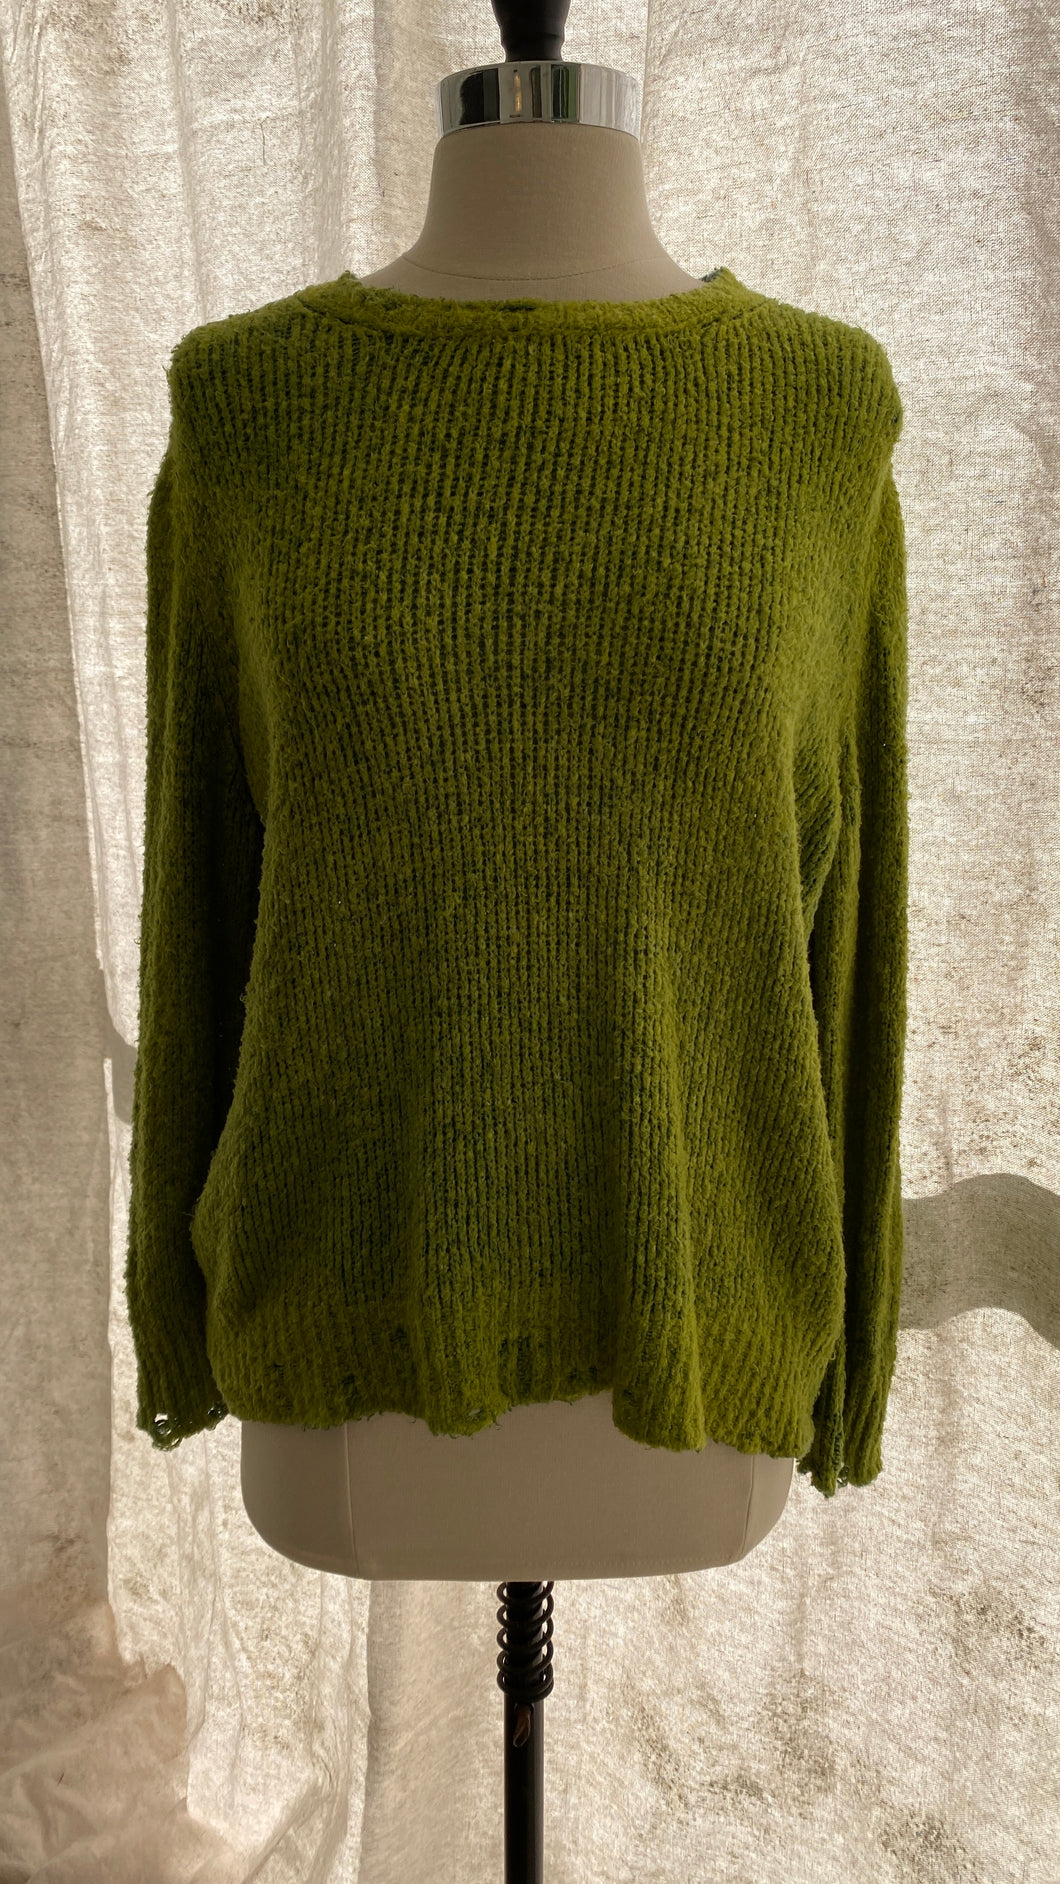 Avant Toi Bi Color Pullover Sweater with Distressed Edges in Apple Buzz Oskar’s Boutique Women’s Tops